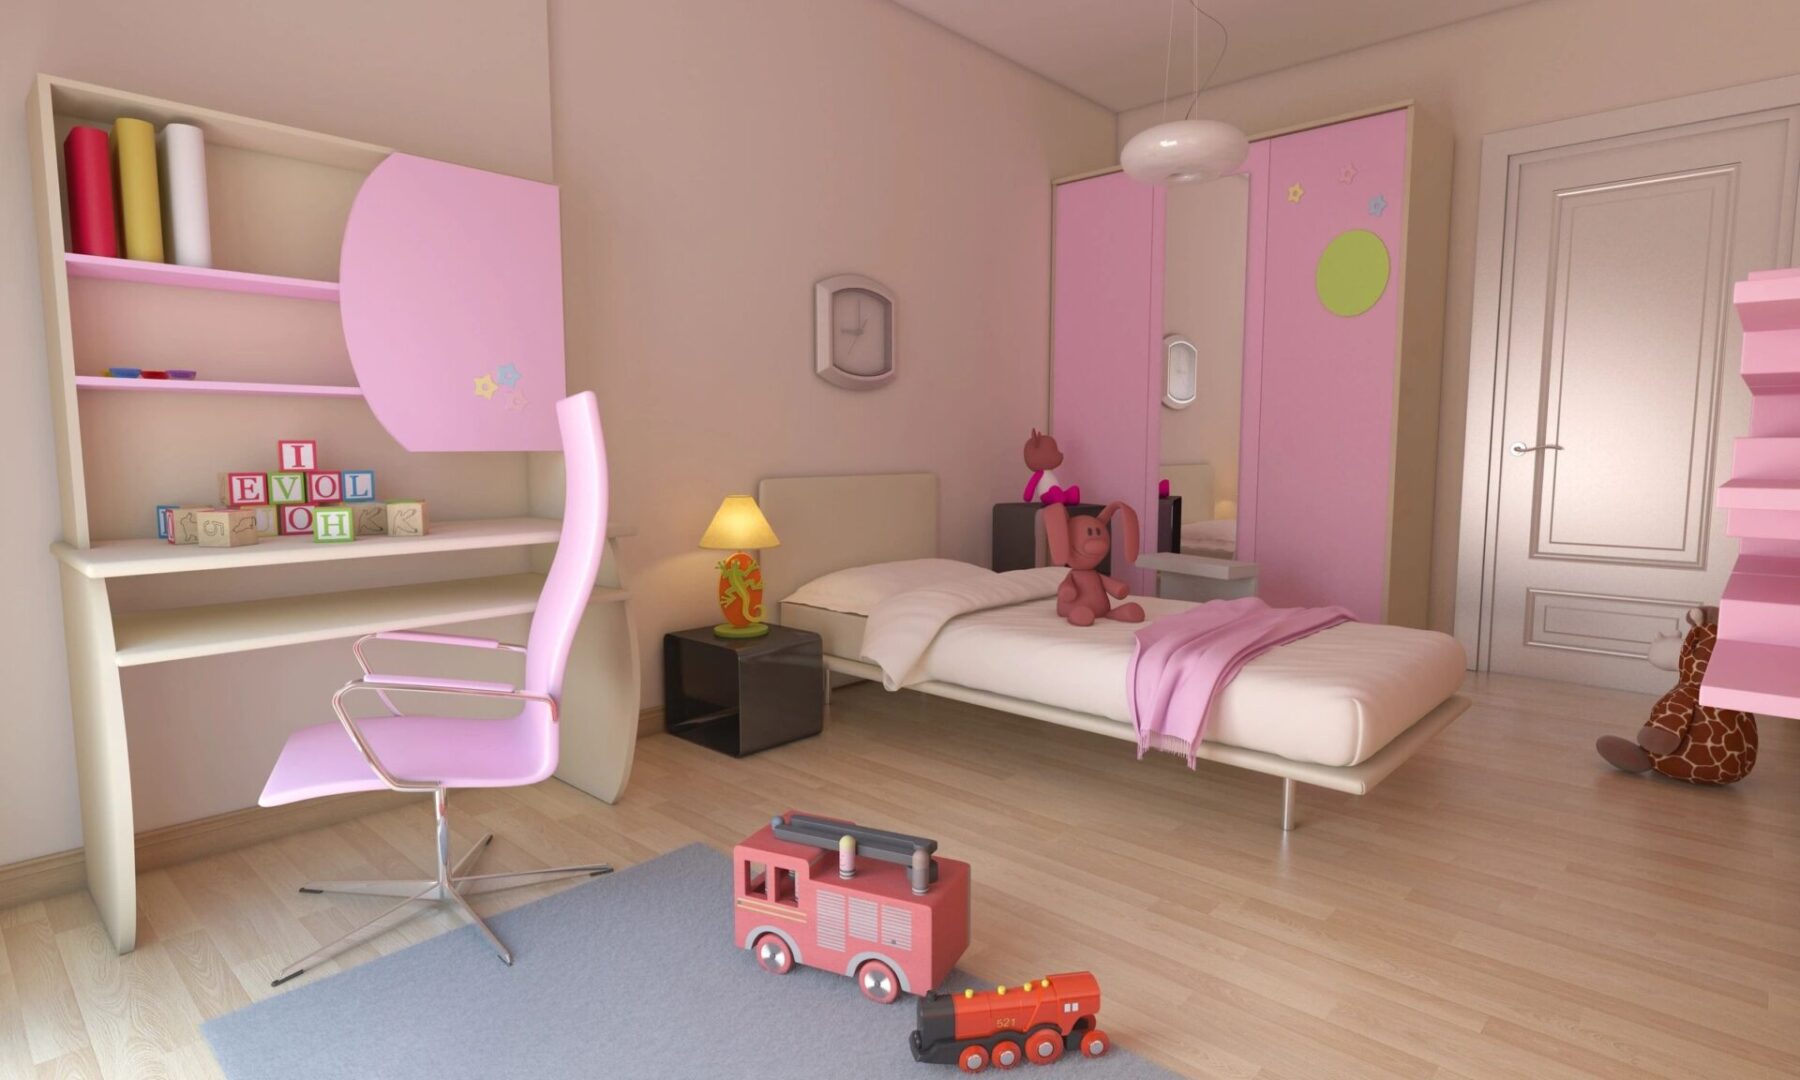 A Pink and White Themed Bedroom for Children